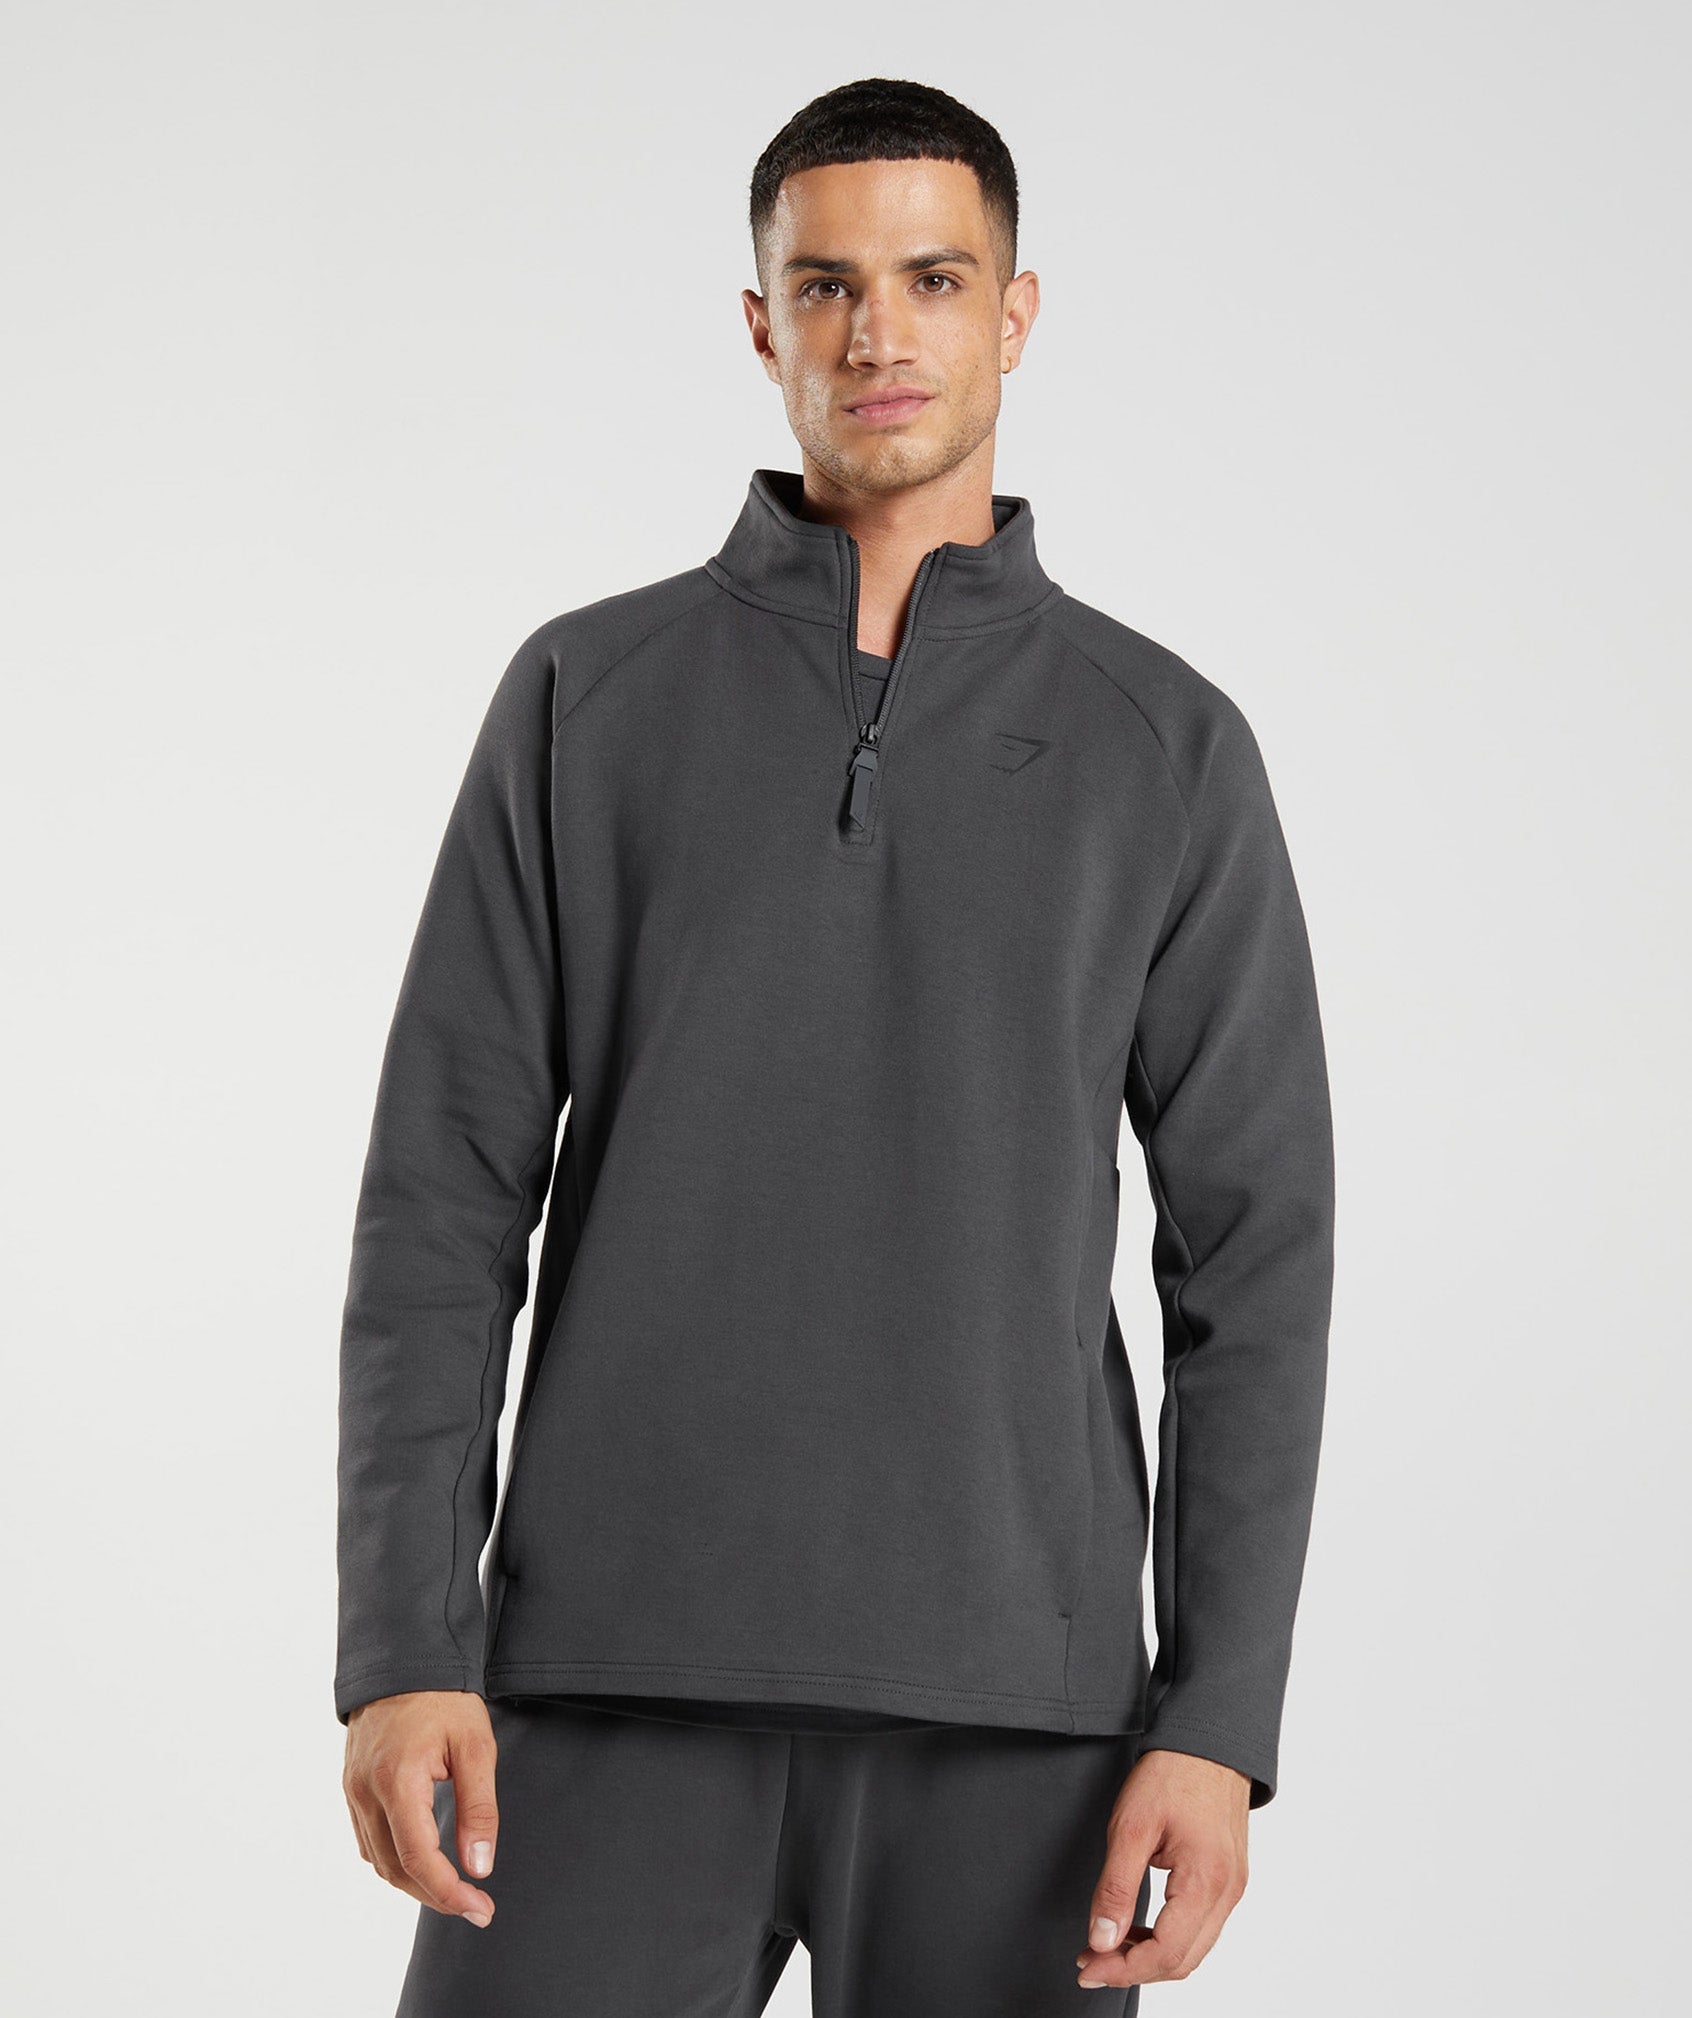 Rest Day 1/4 Zip in Onyx Grey is out of stock